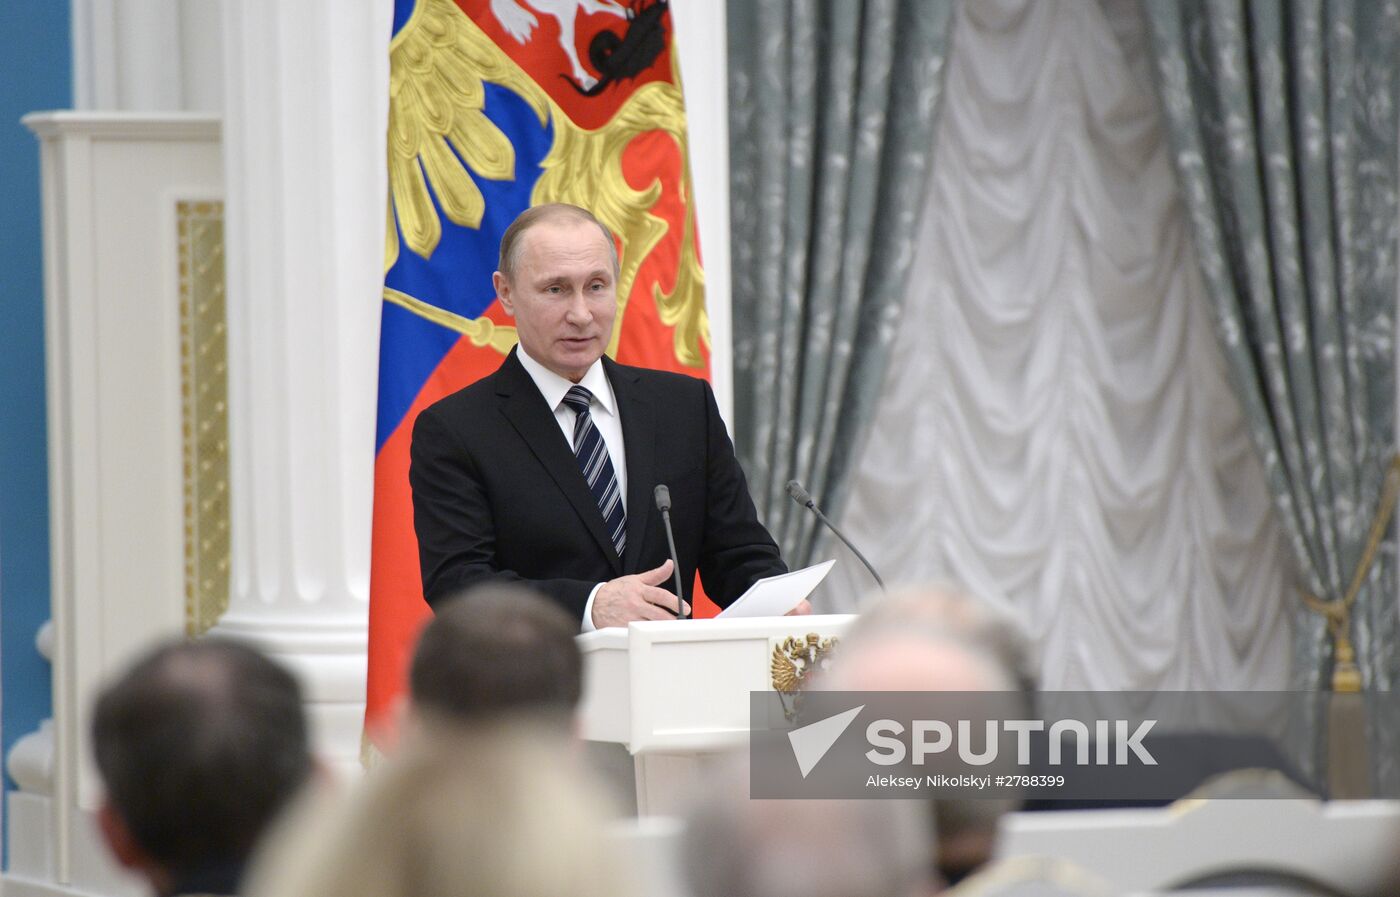 President Vladimir Putin presents Prizes in Science and Innovation for Young Scientists